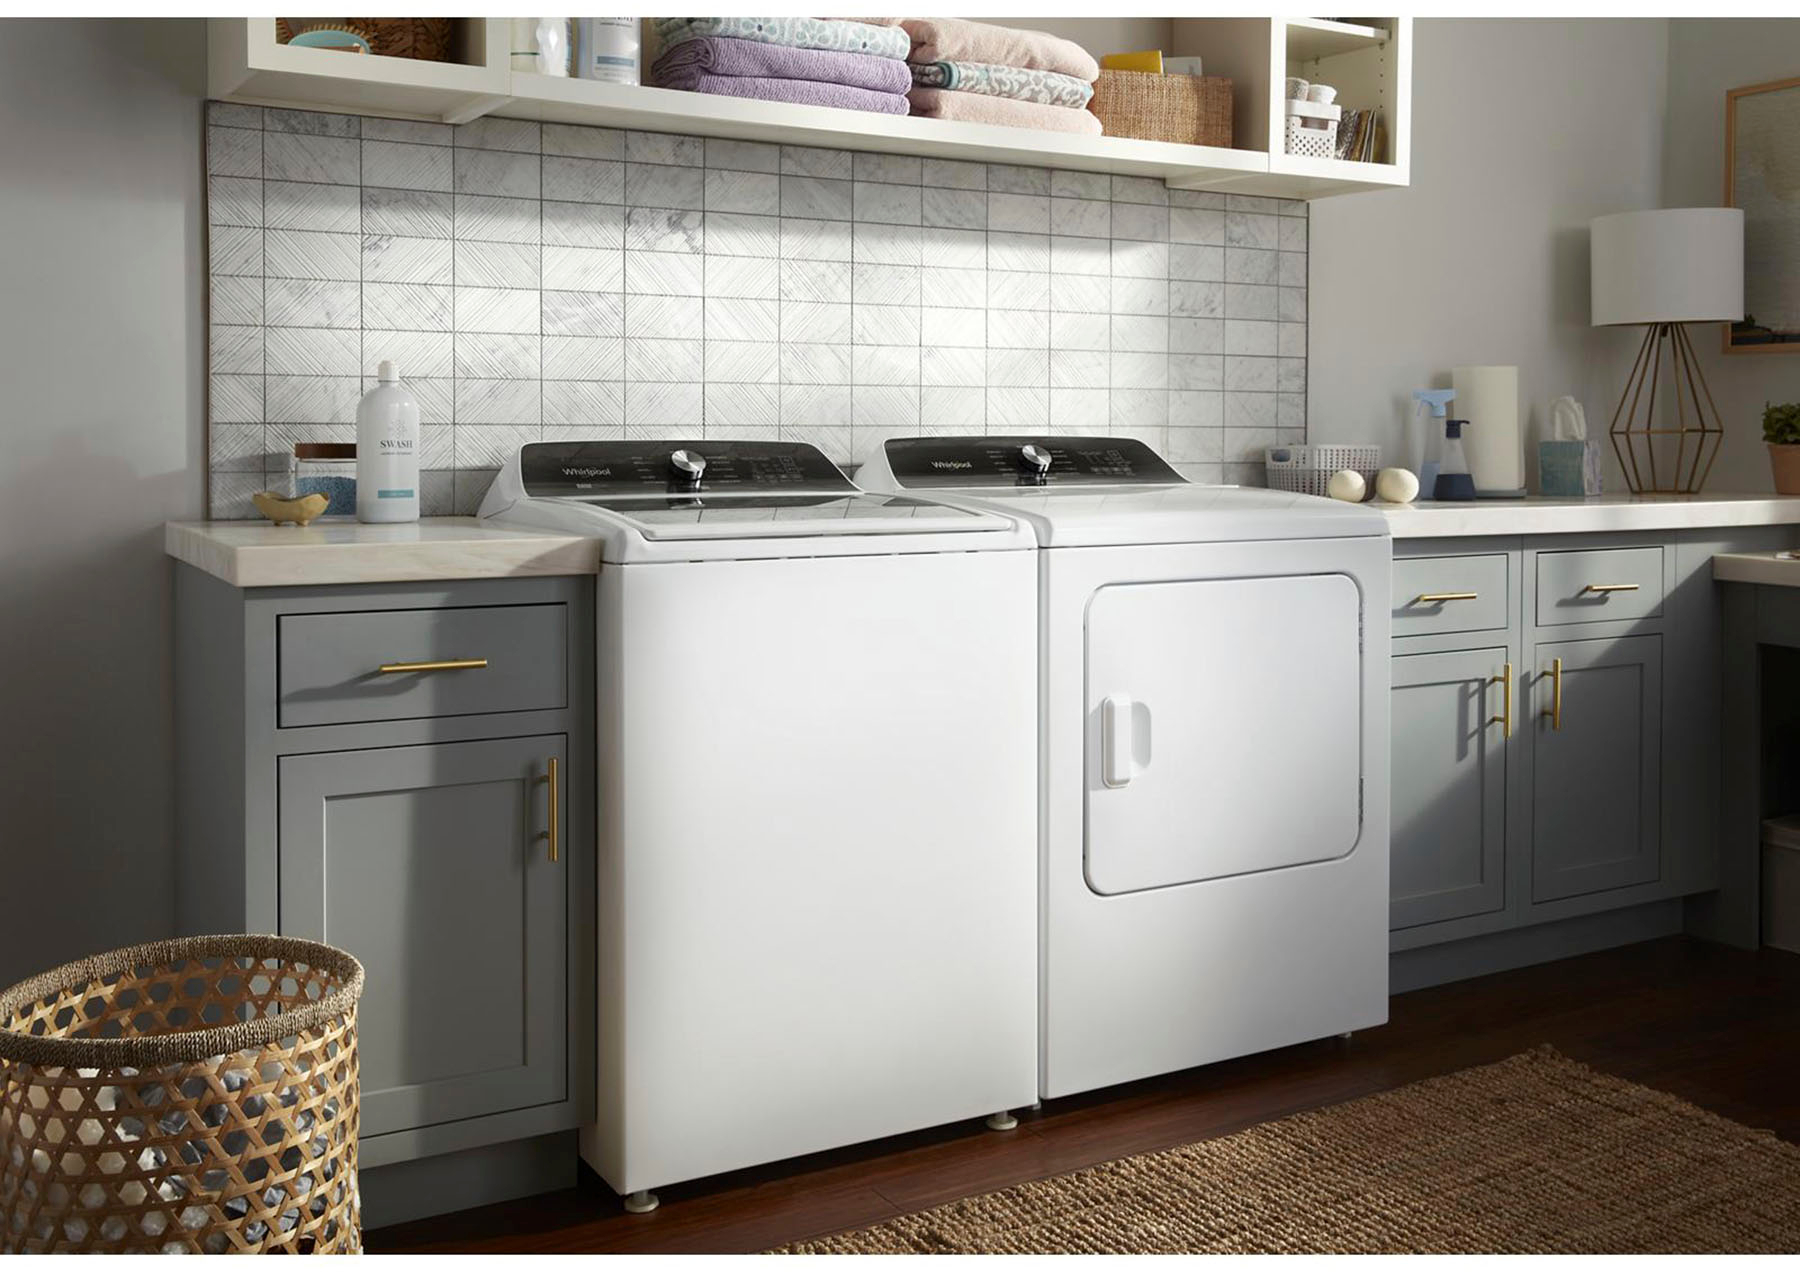 Whirlpool 4.7 - 4.8 cu. ft. Top Load Washer with 2 in 1 Removable Agitator  in White WTW5057LW - The Home Depot